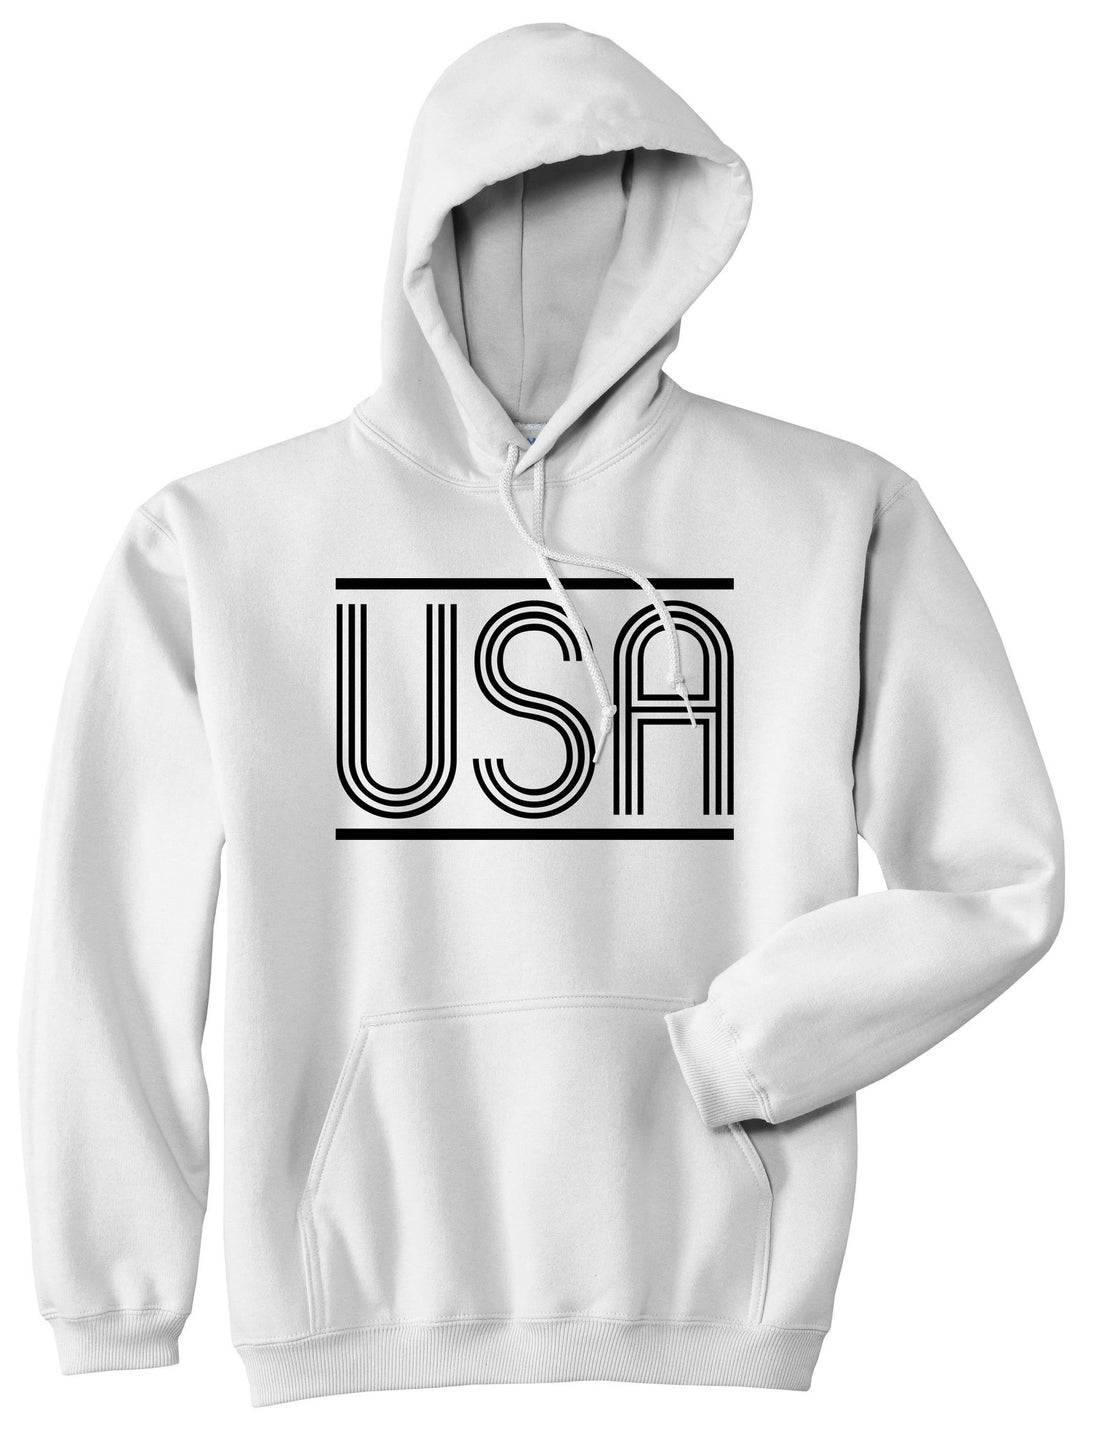 USA America Fall15 Boys Kids Pullover Hoodie Hoody in White by Kings Of NY